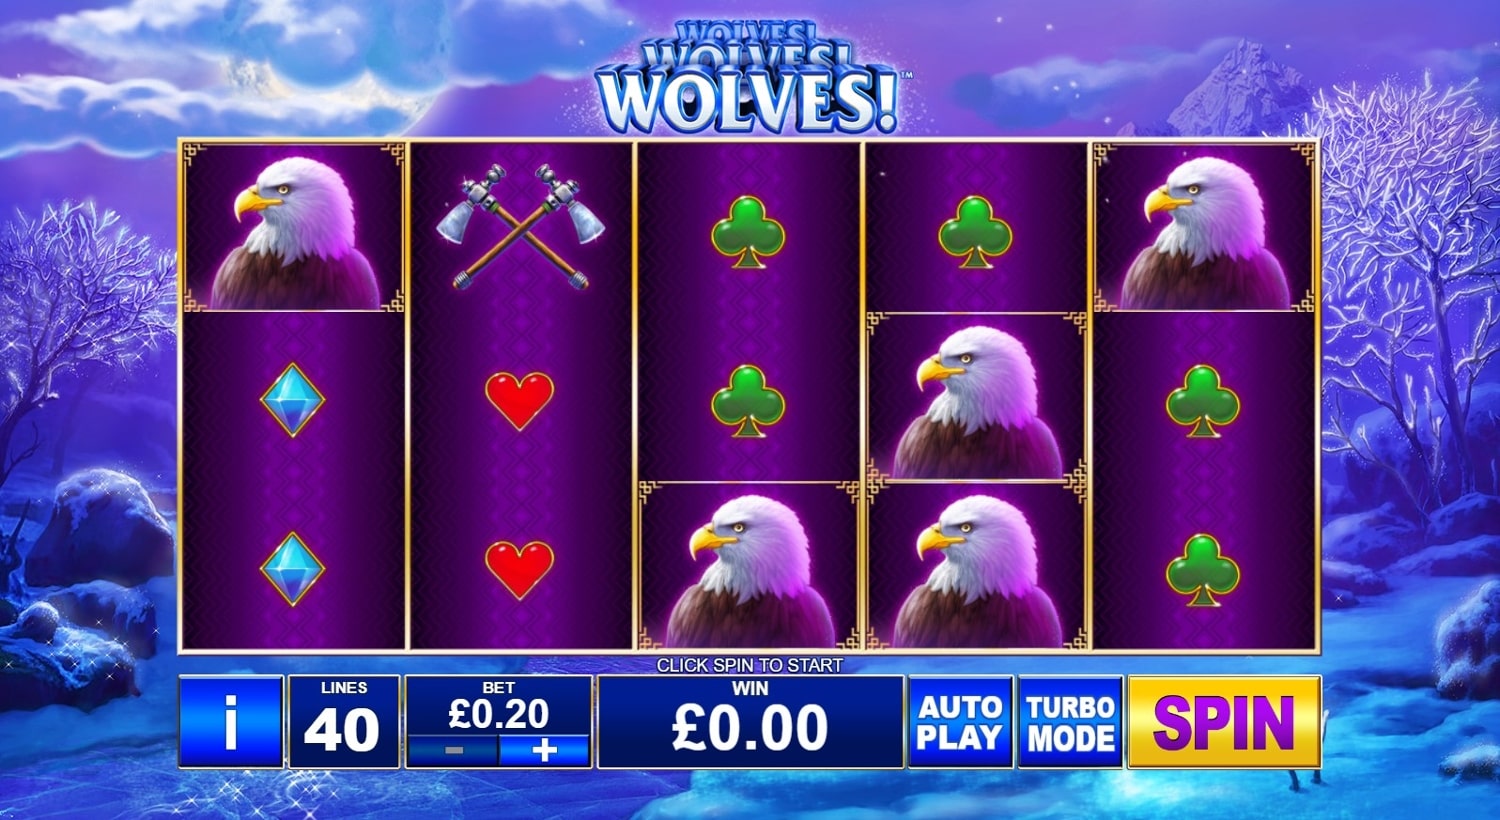 Wolves! Wolves! Wolves! Free Spins